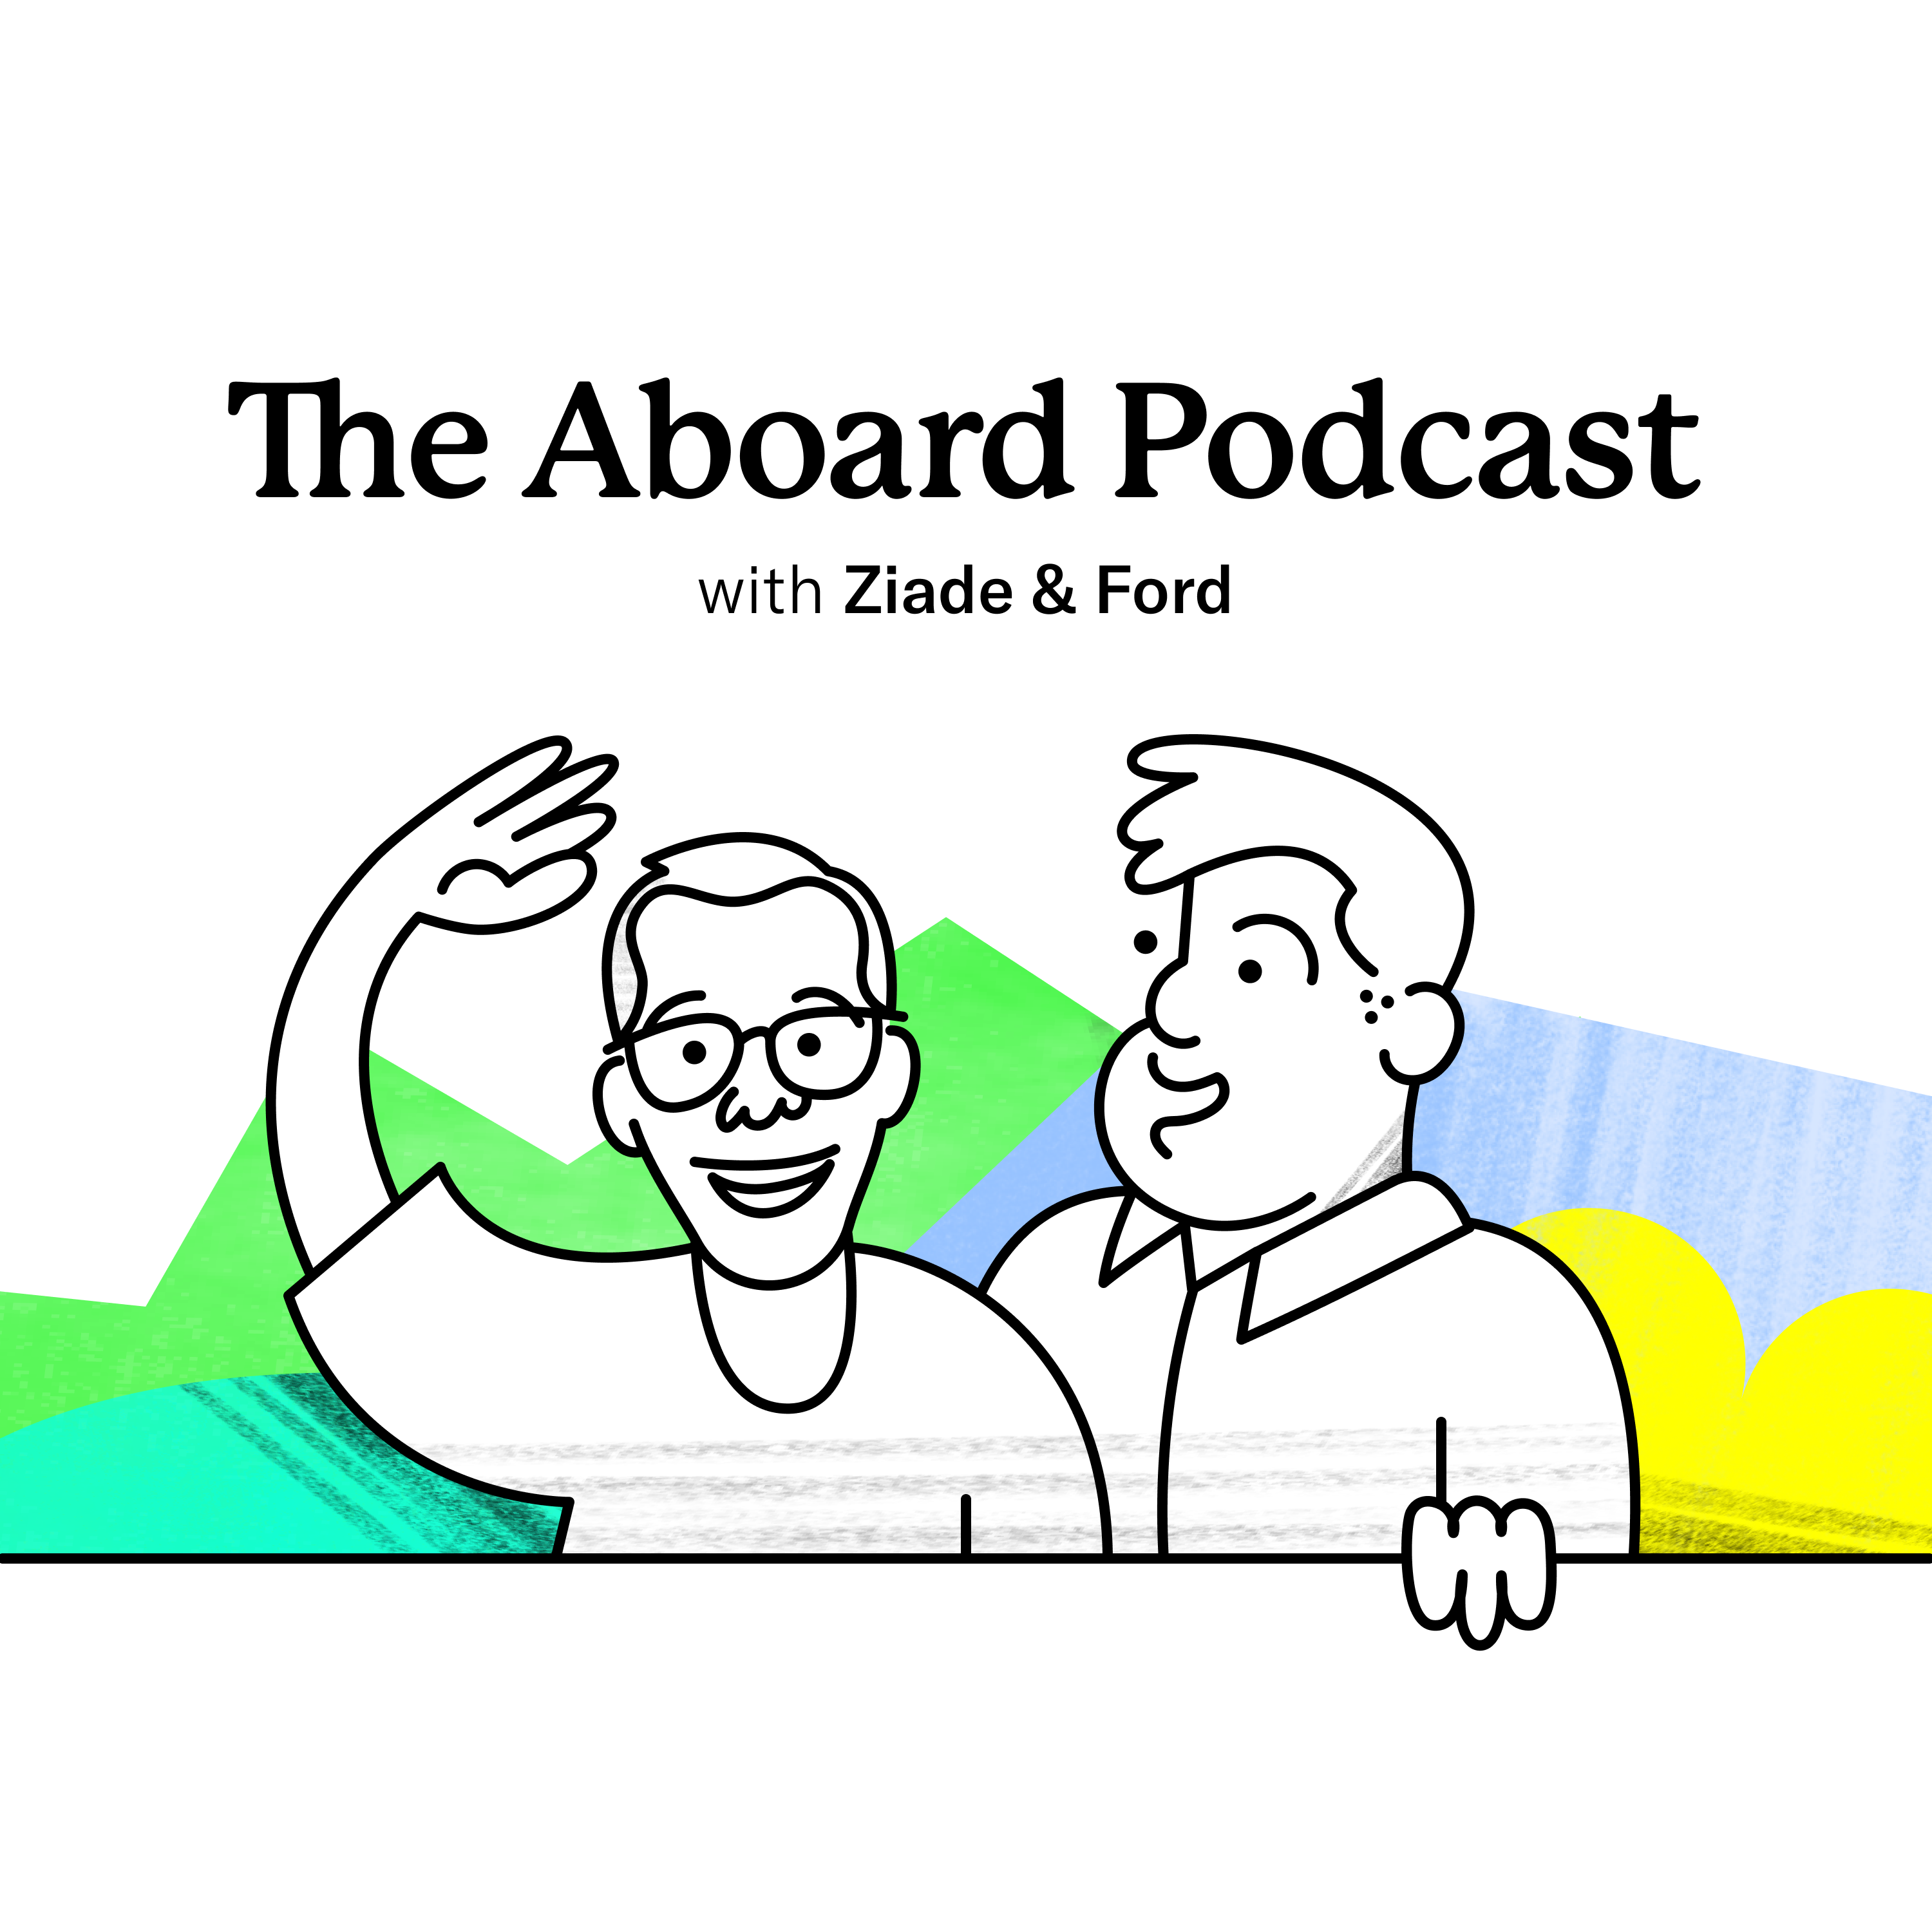 Artwork for podcast The Aboard Podcast